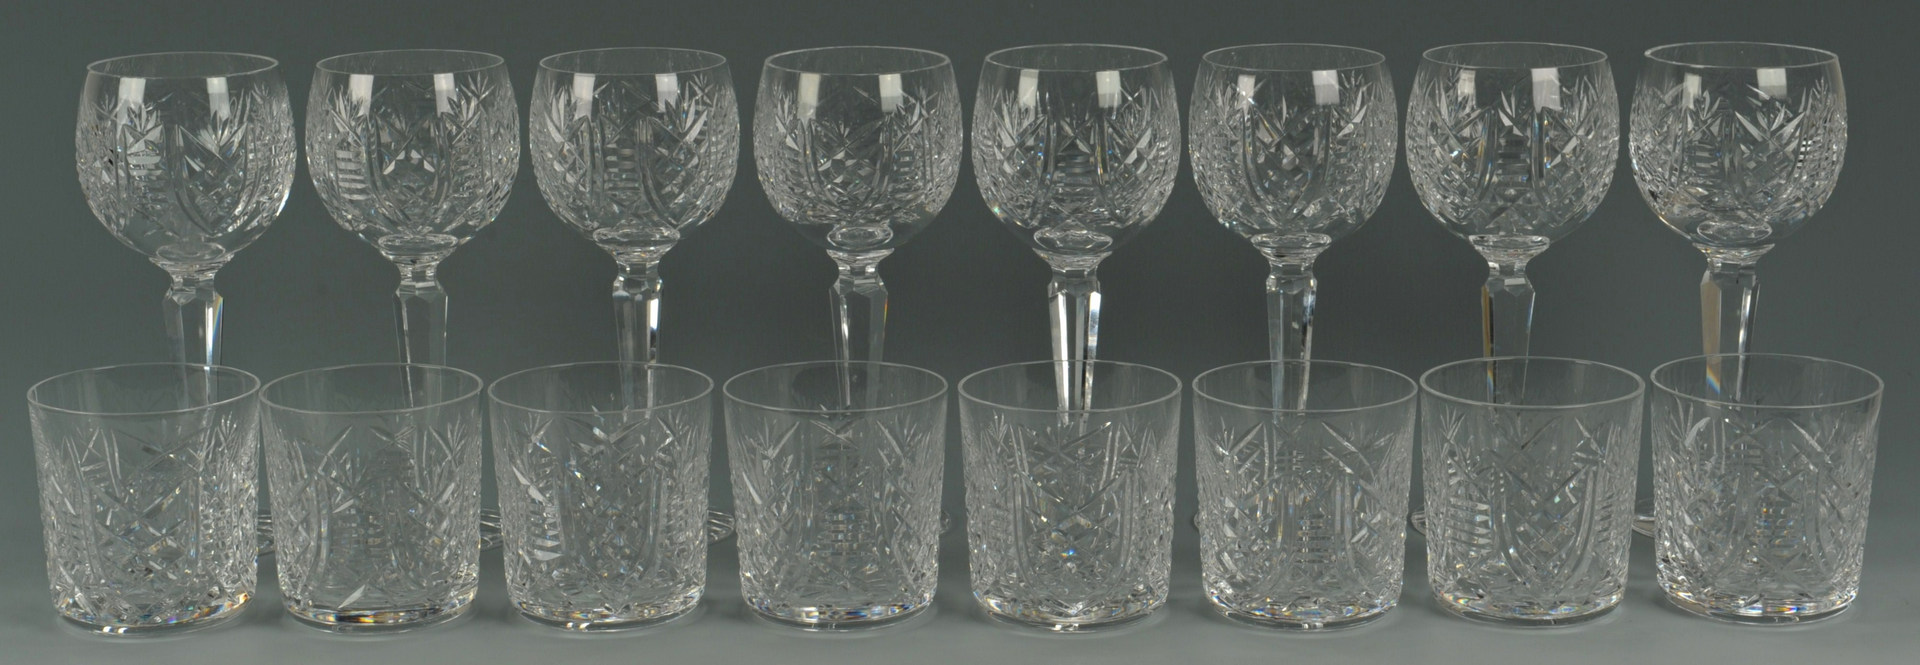 Lot 118: Waterford Clare Crystal Wine Hocks & Tumblers